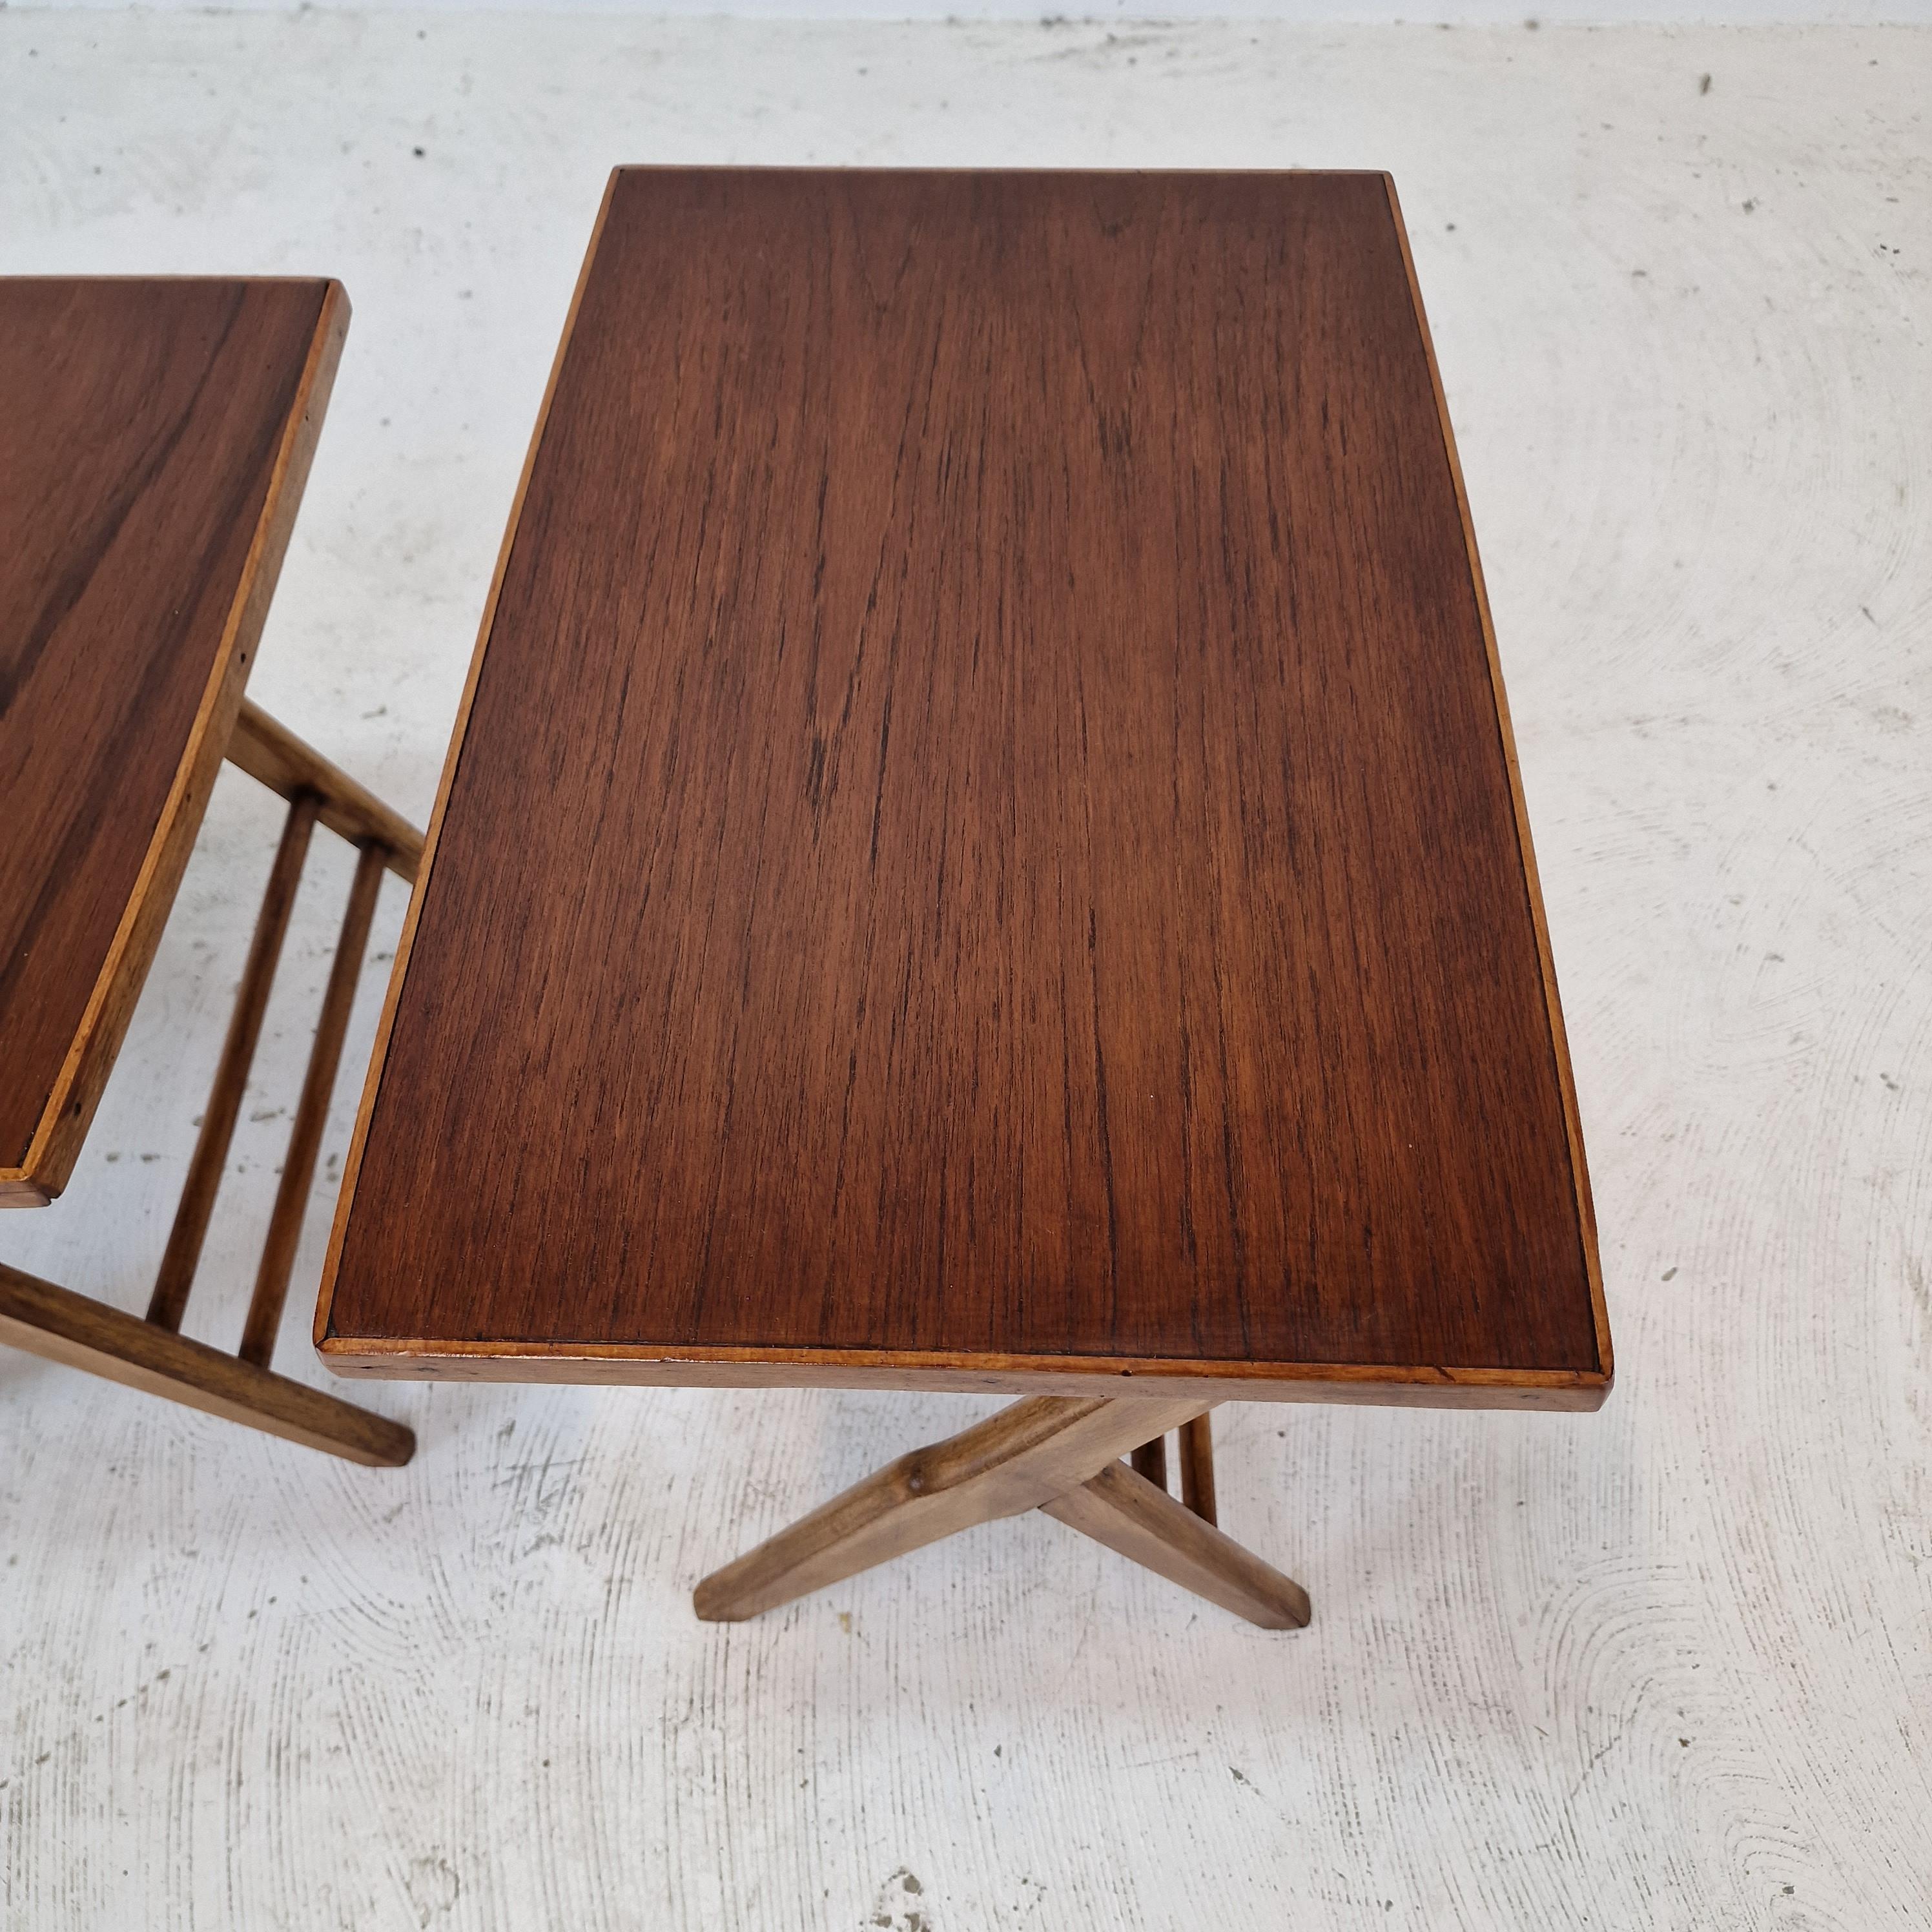 Set of 3 Wooden Nesting Tables, Holland 1960s For Sale 6